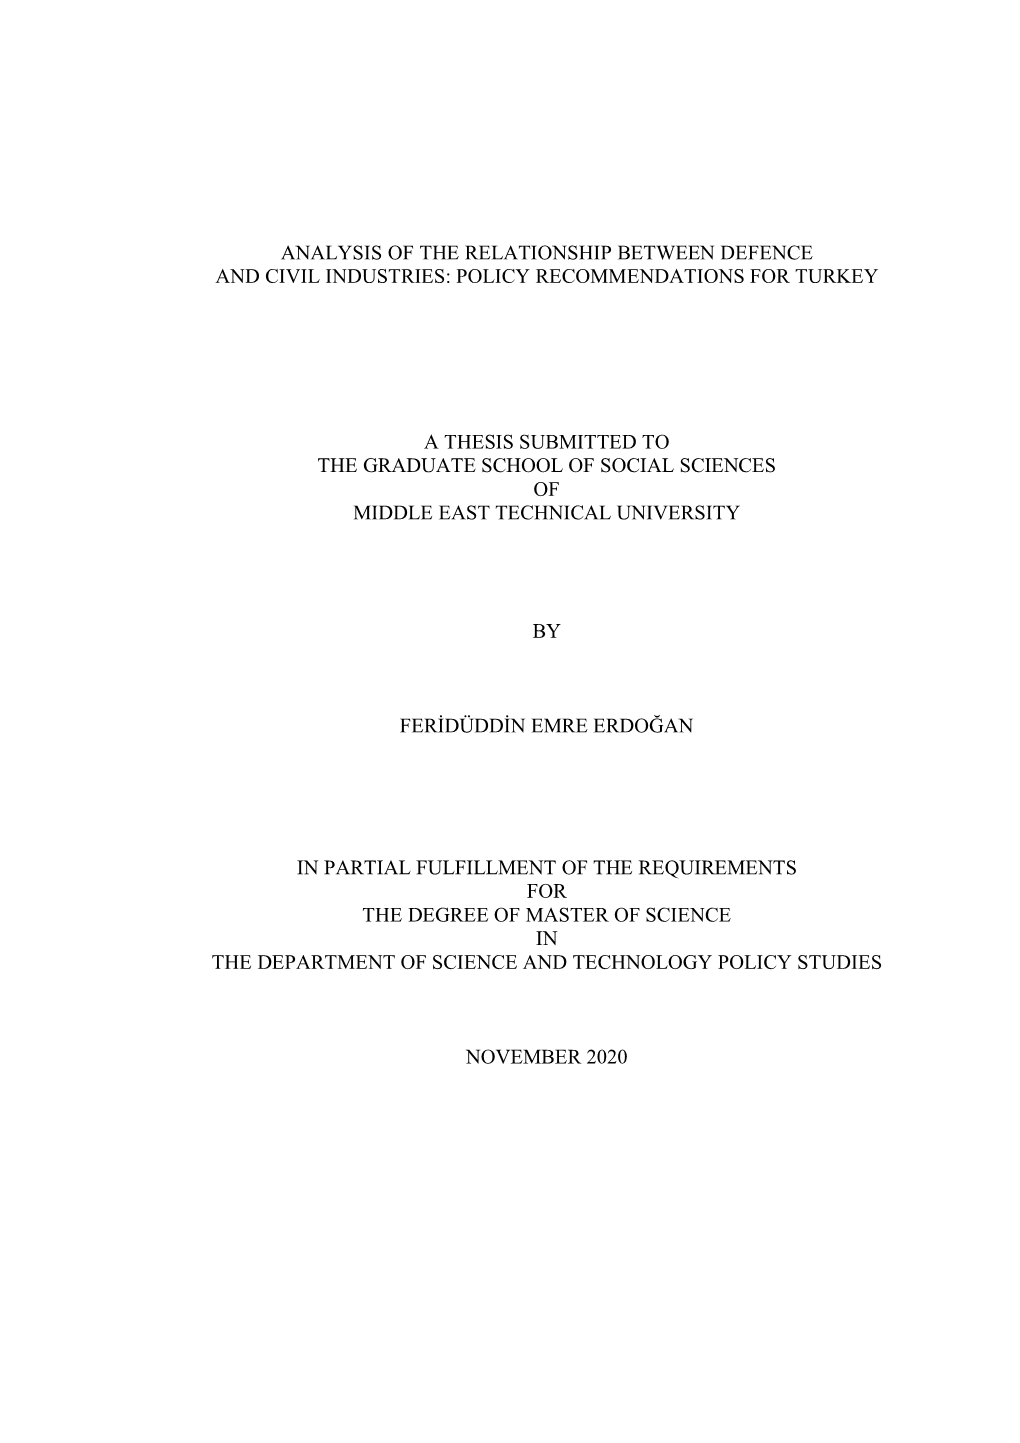 Analysis of the Relationship Between Defence and Civil Industries: Policy Recommendations for Turkey